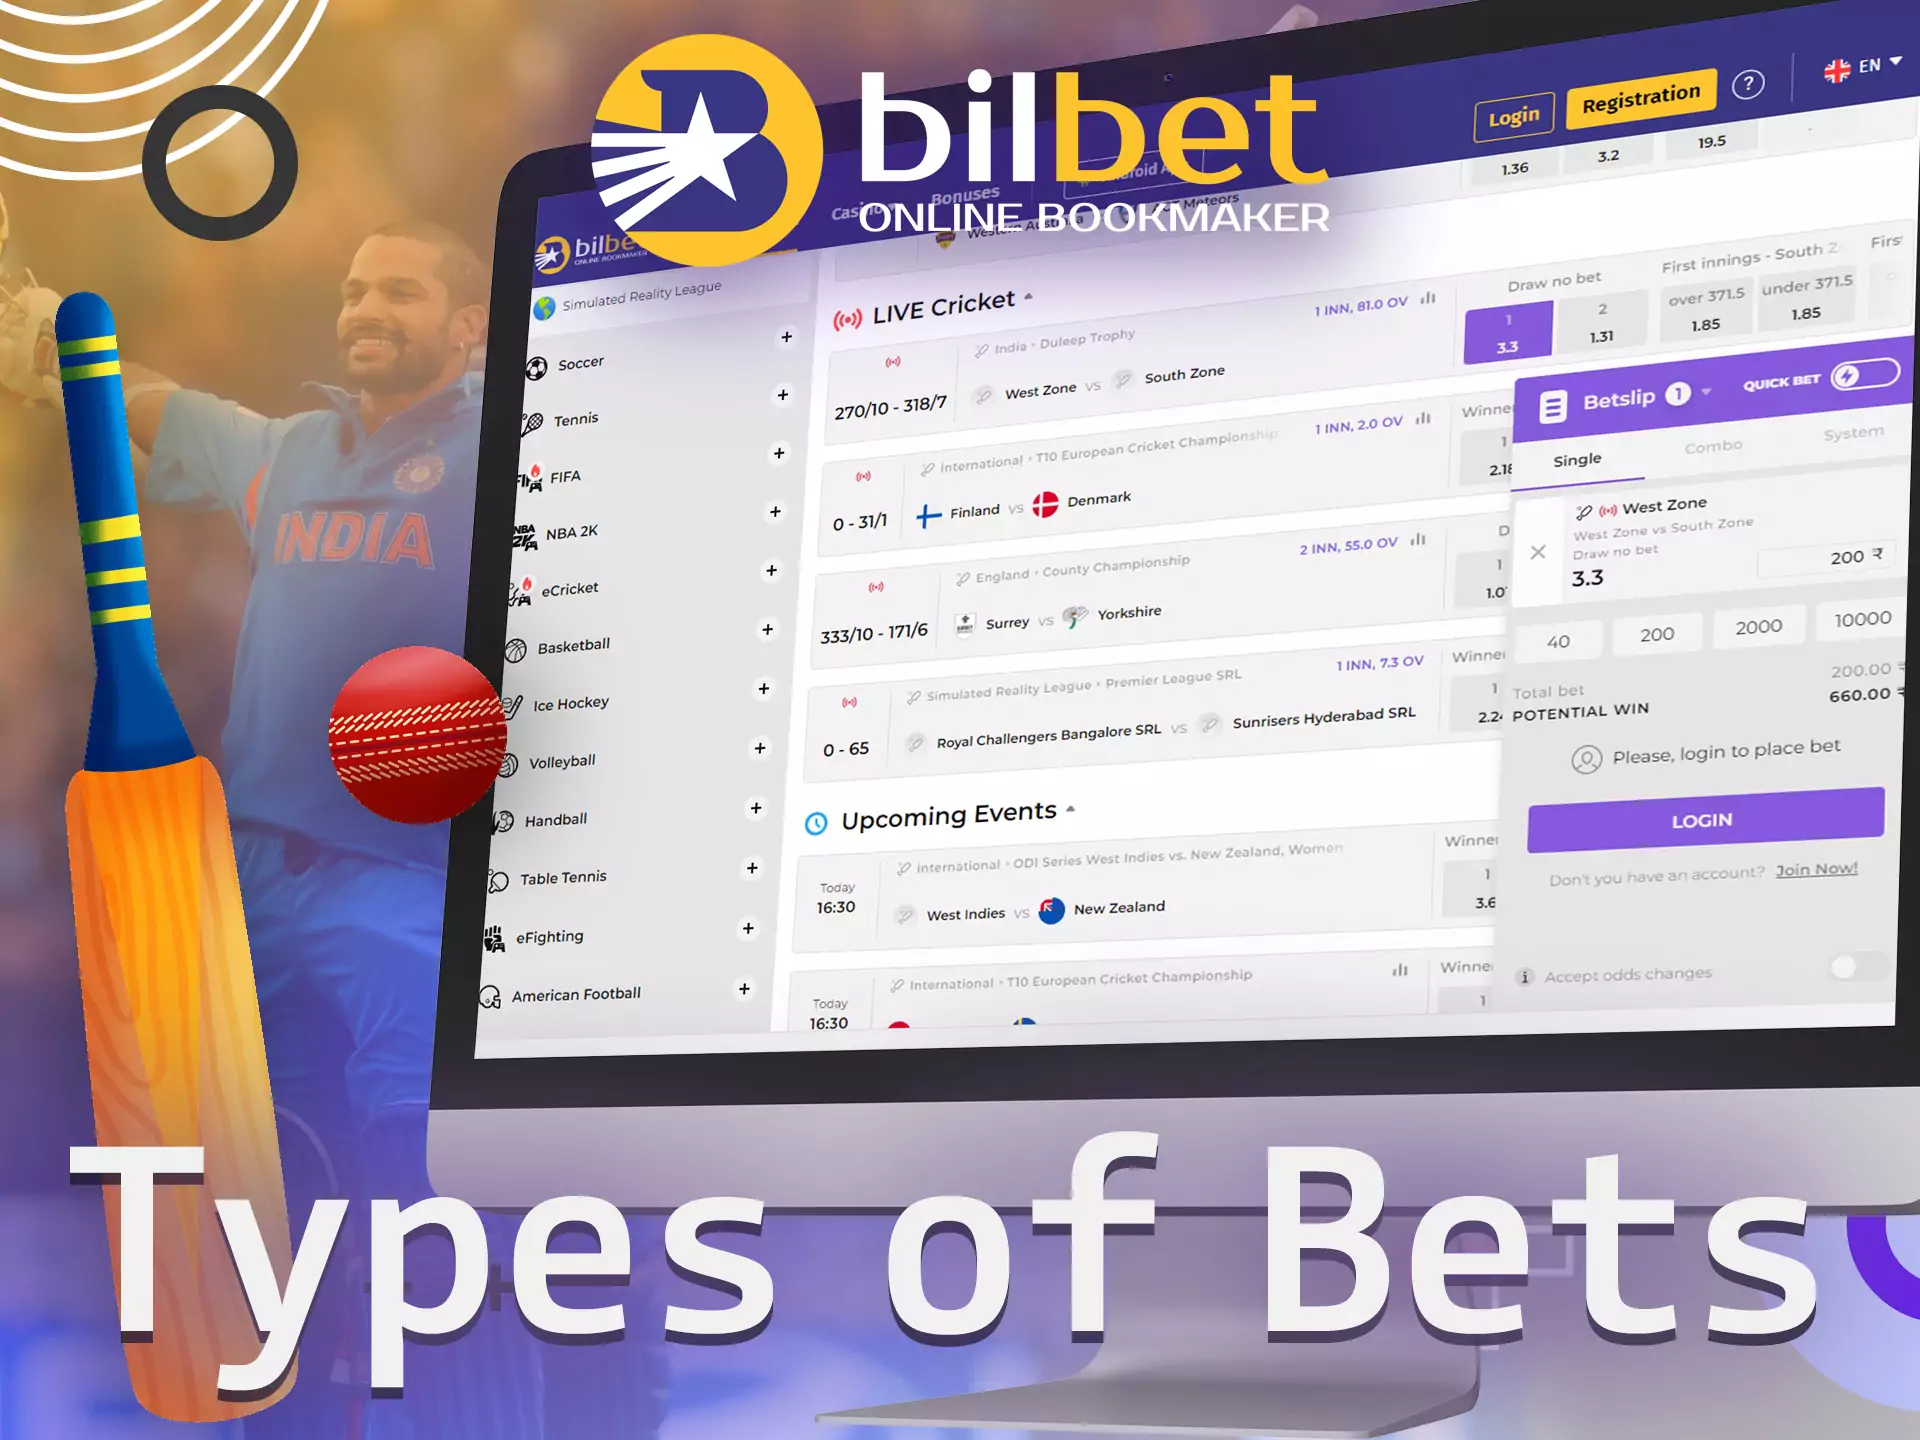 On the Bilbet website, you can combine different types of bets on your betslip.